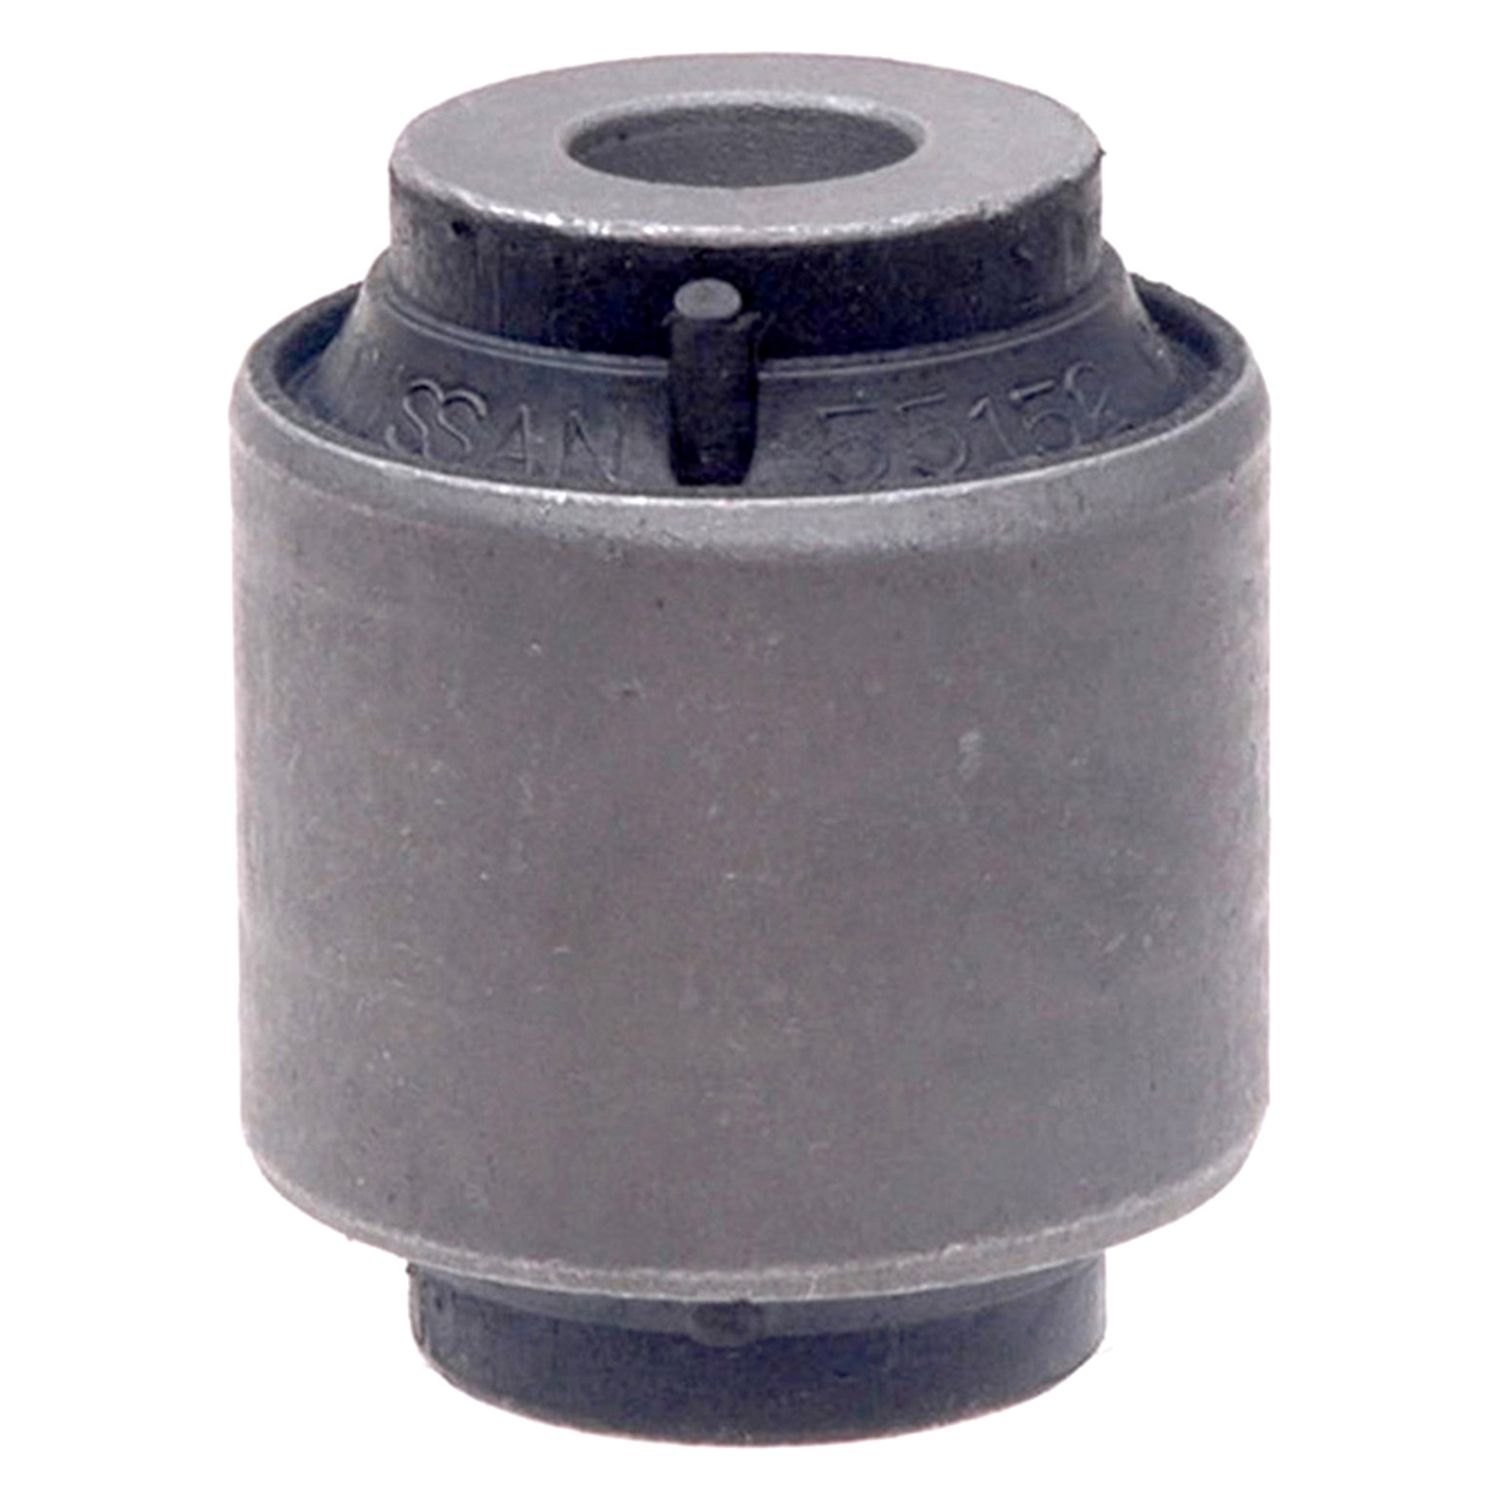 ACDelco 45G9288 Professional Front Lower Suspension Control Arm Front Bushing 45G9288-ACD 